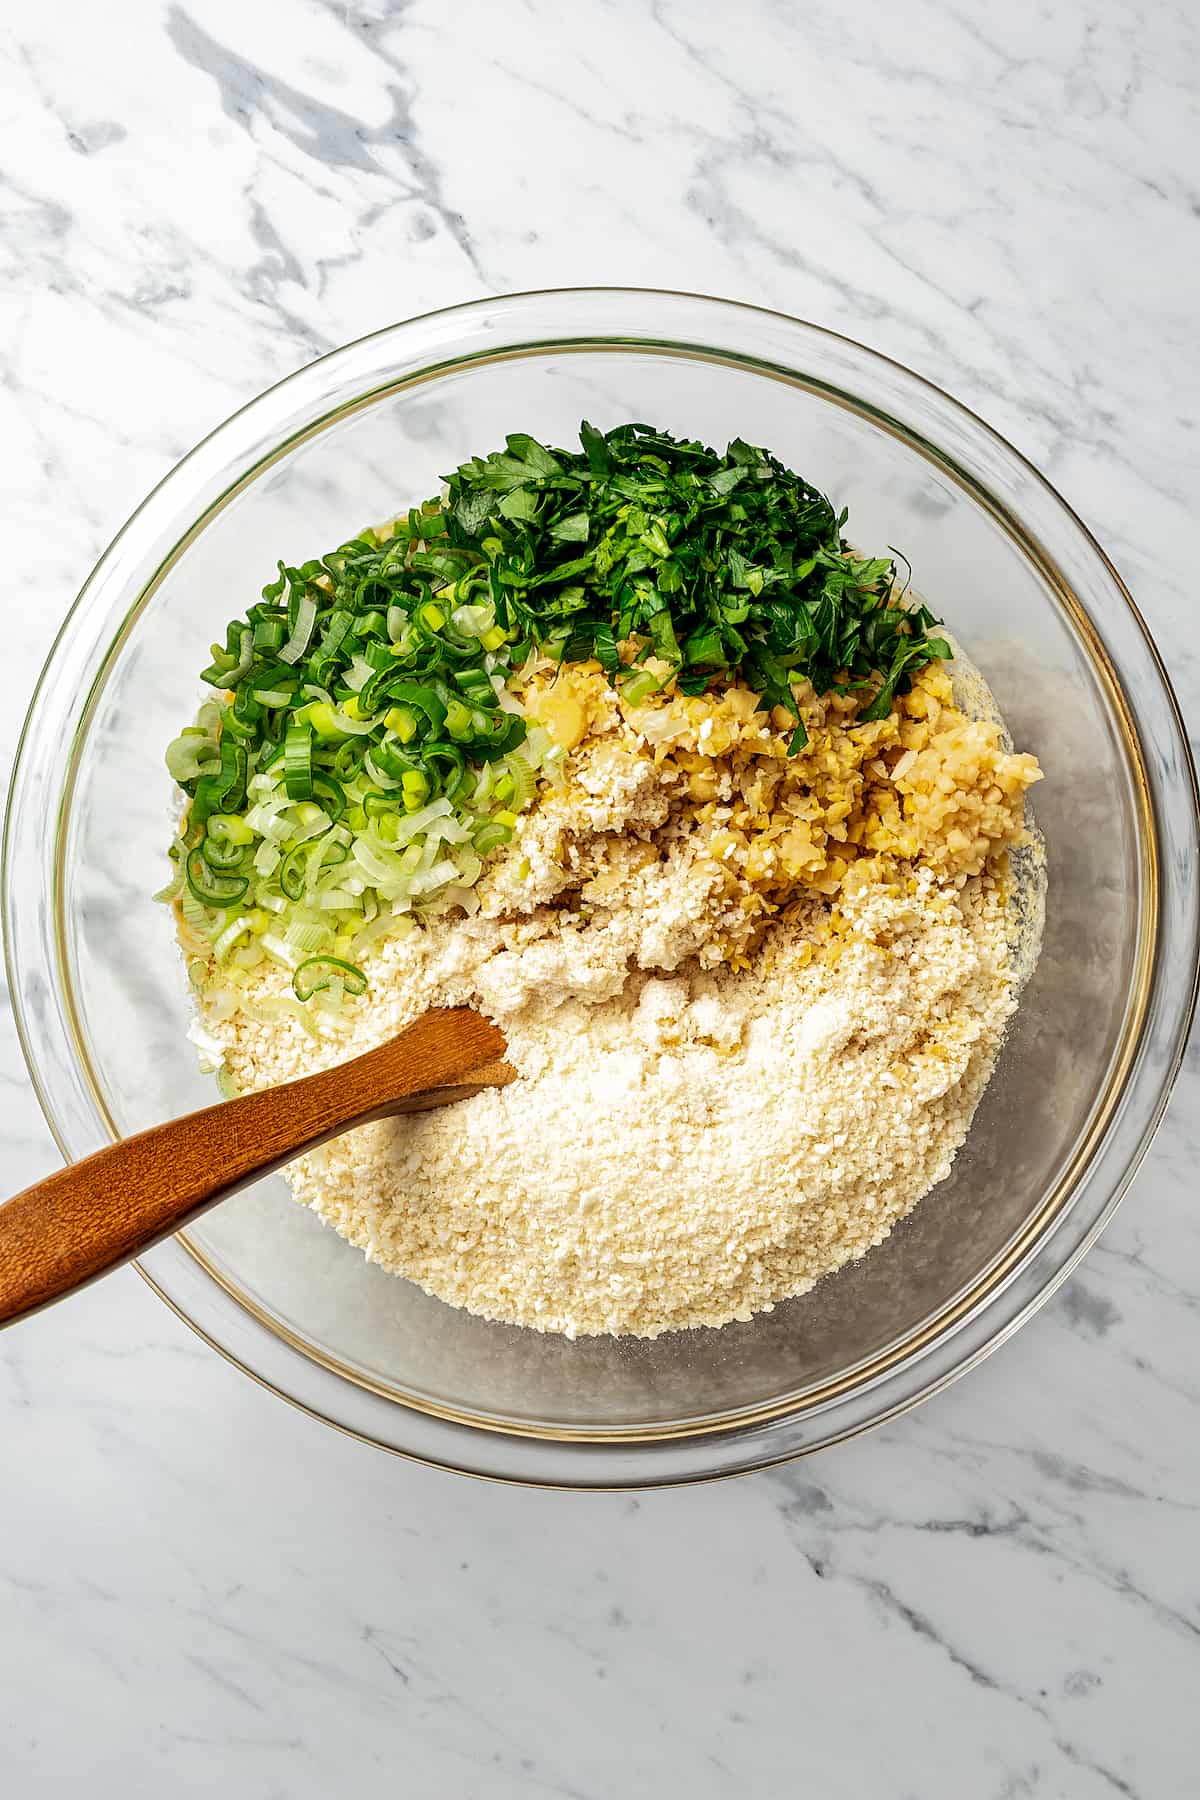 Parsley, breadcrumbs, ground chickpeas, and other ingredients in a glass bowl with a wooden spoon.